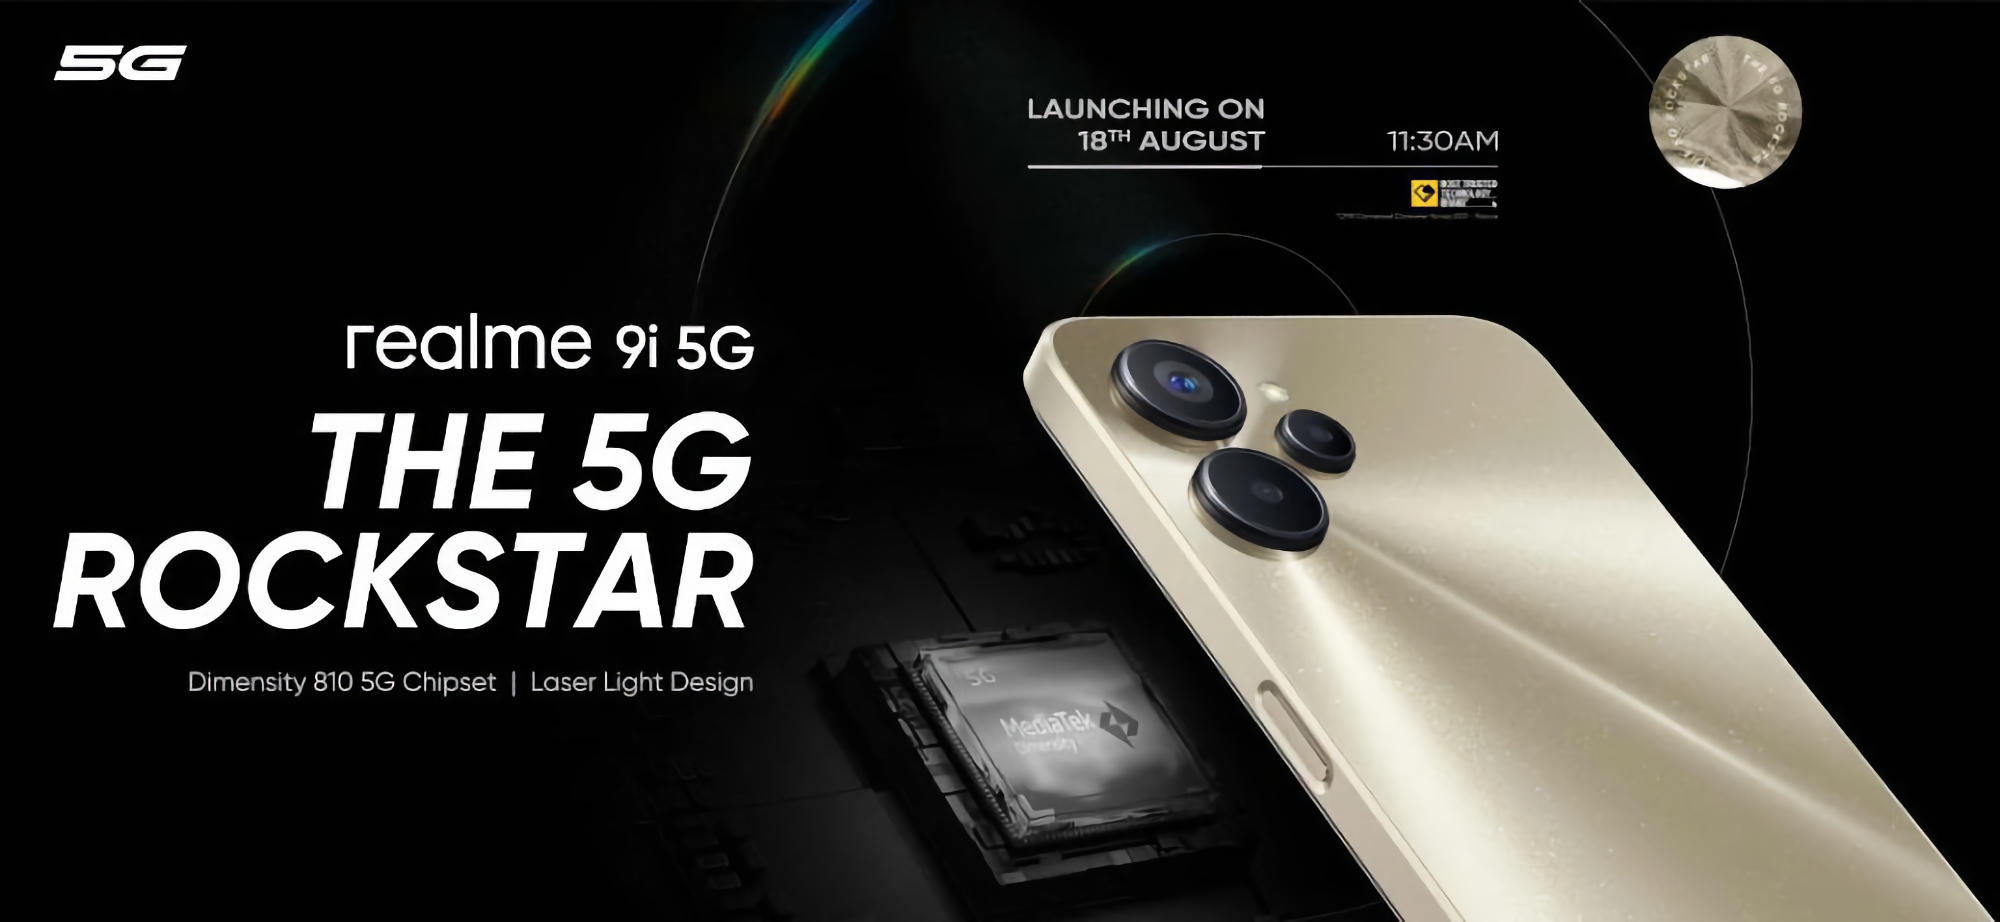 realme 9i 5G with MediaTek Dimensity 810 chip and triple camera to be unveiled on August 18